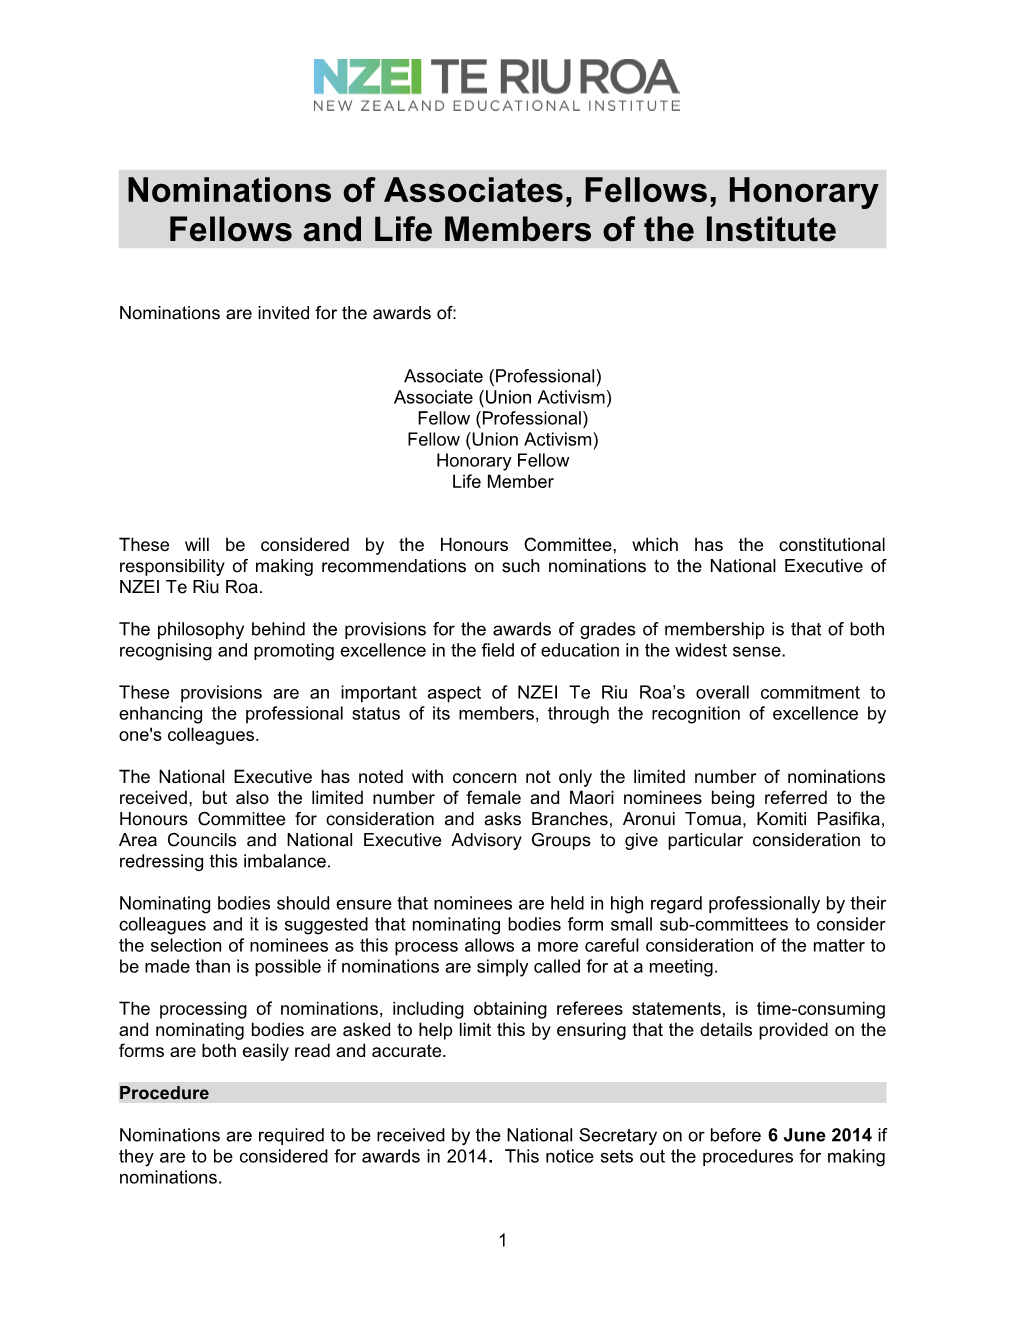 Nominations of Associates, Fellows, Honorary Fellows and Life Members of the Institute